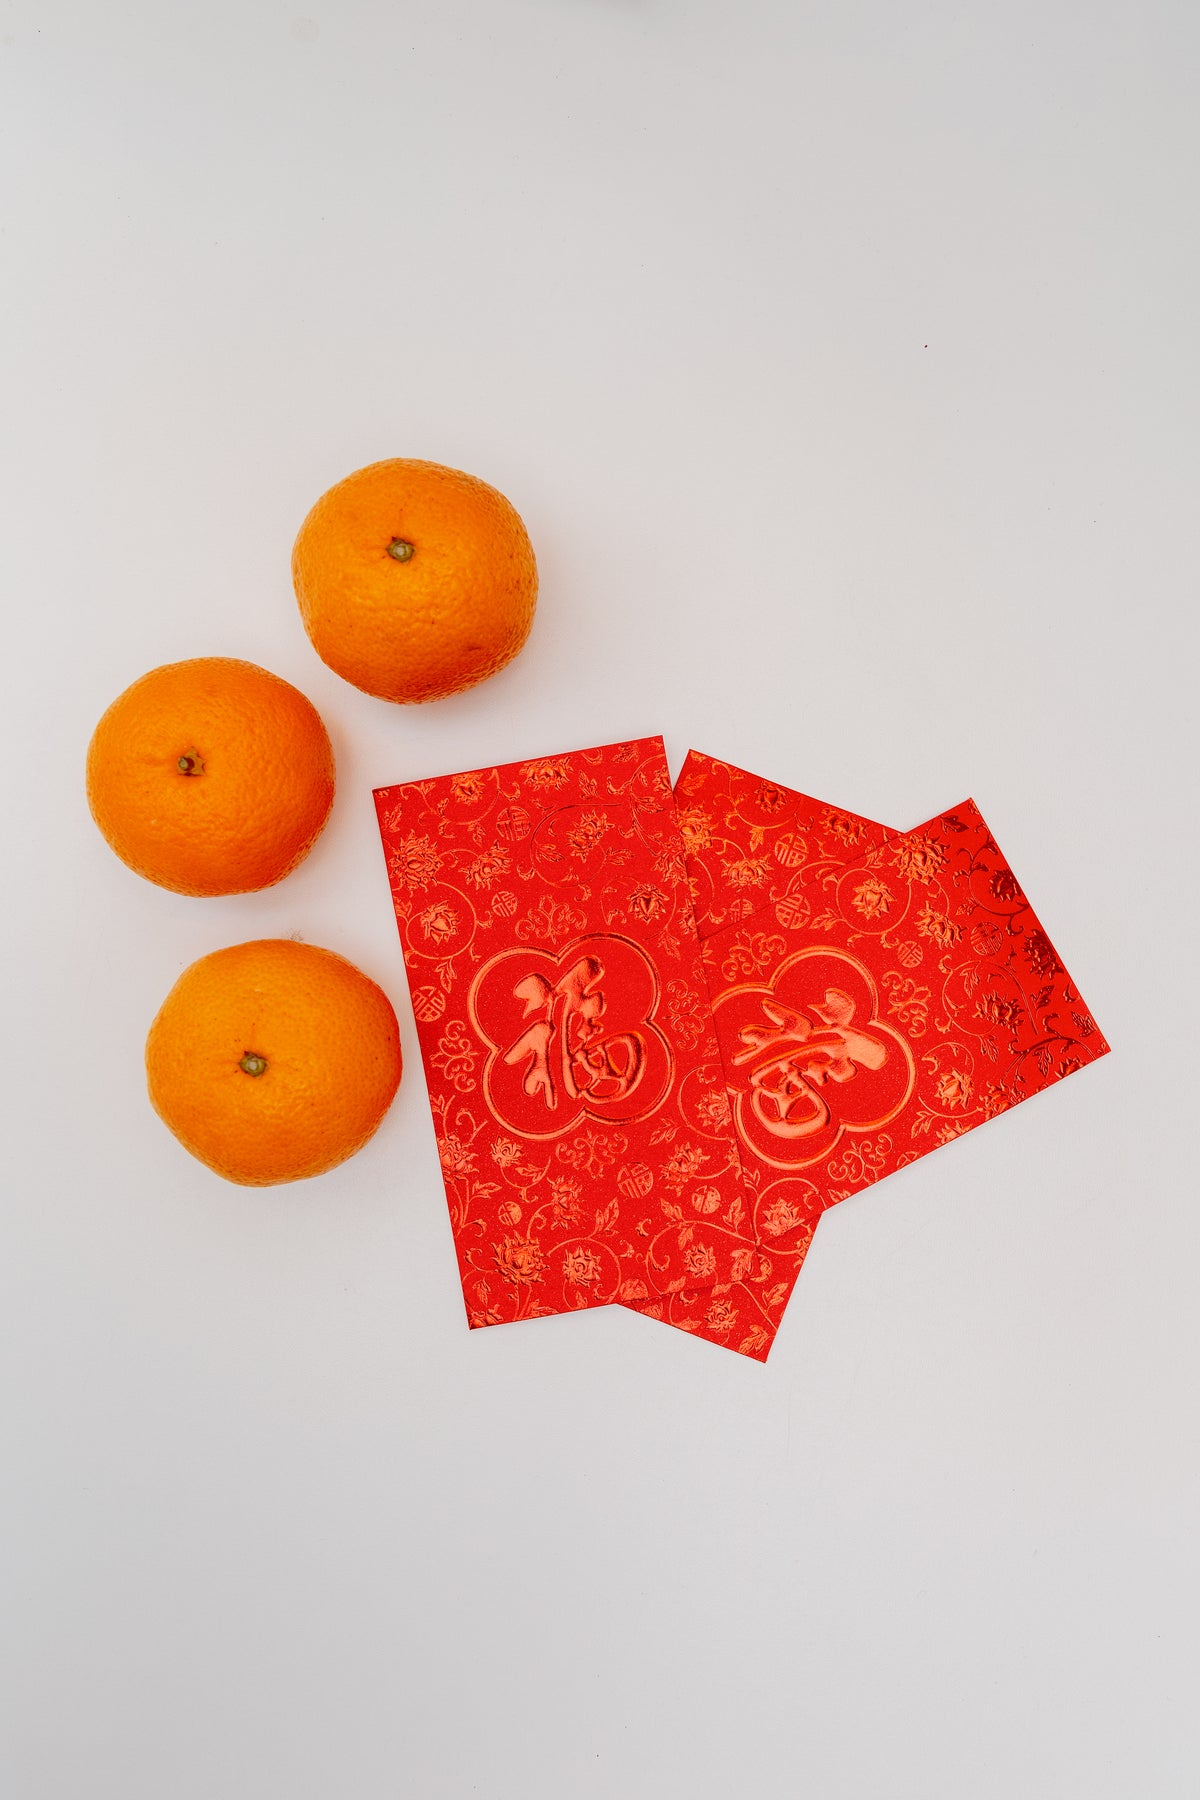 three oranges and three fanned out red cards on white